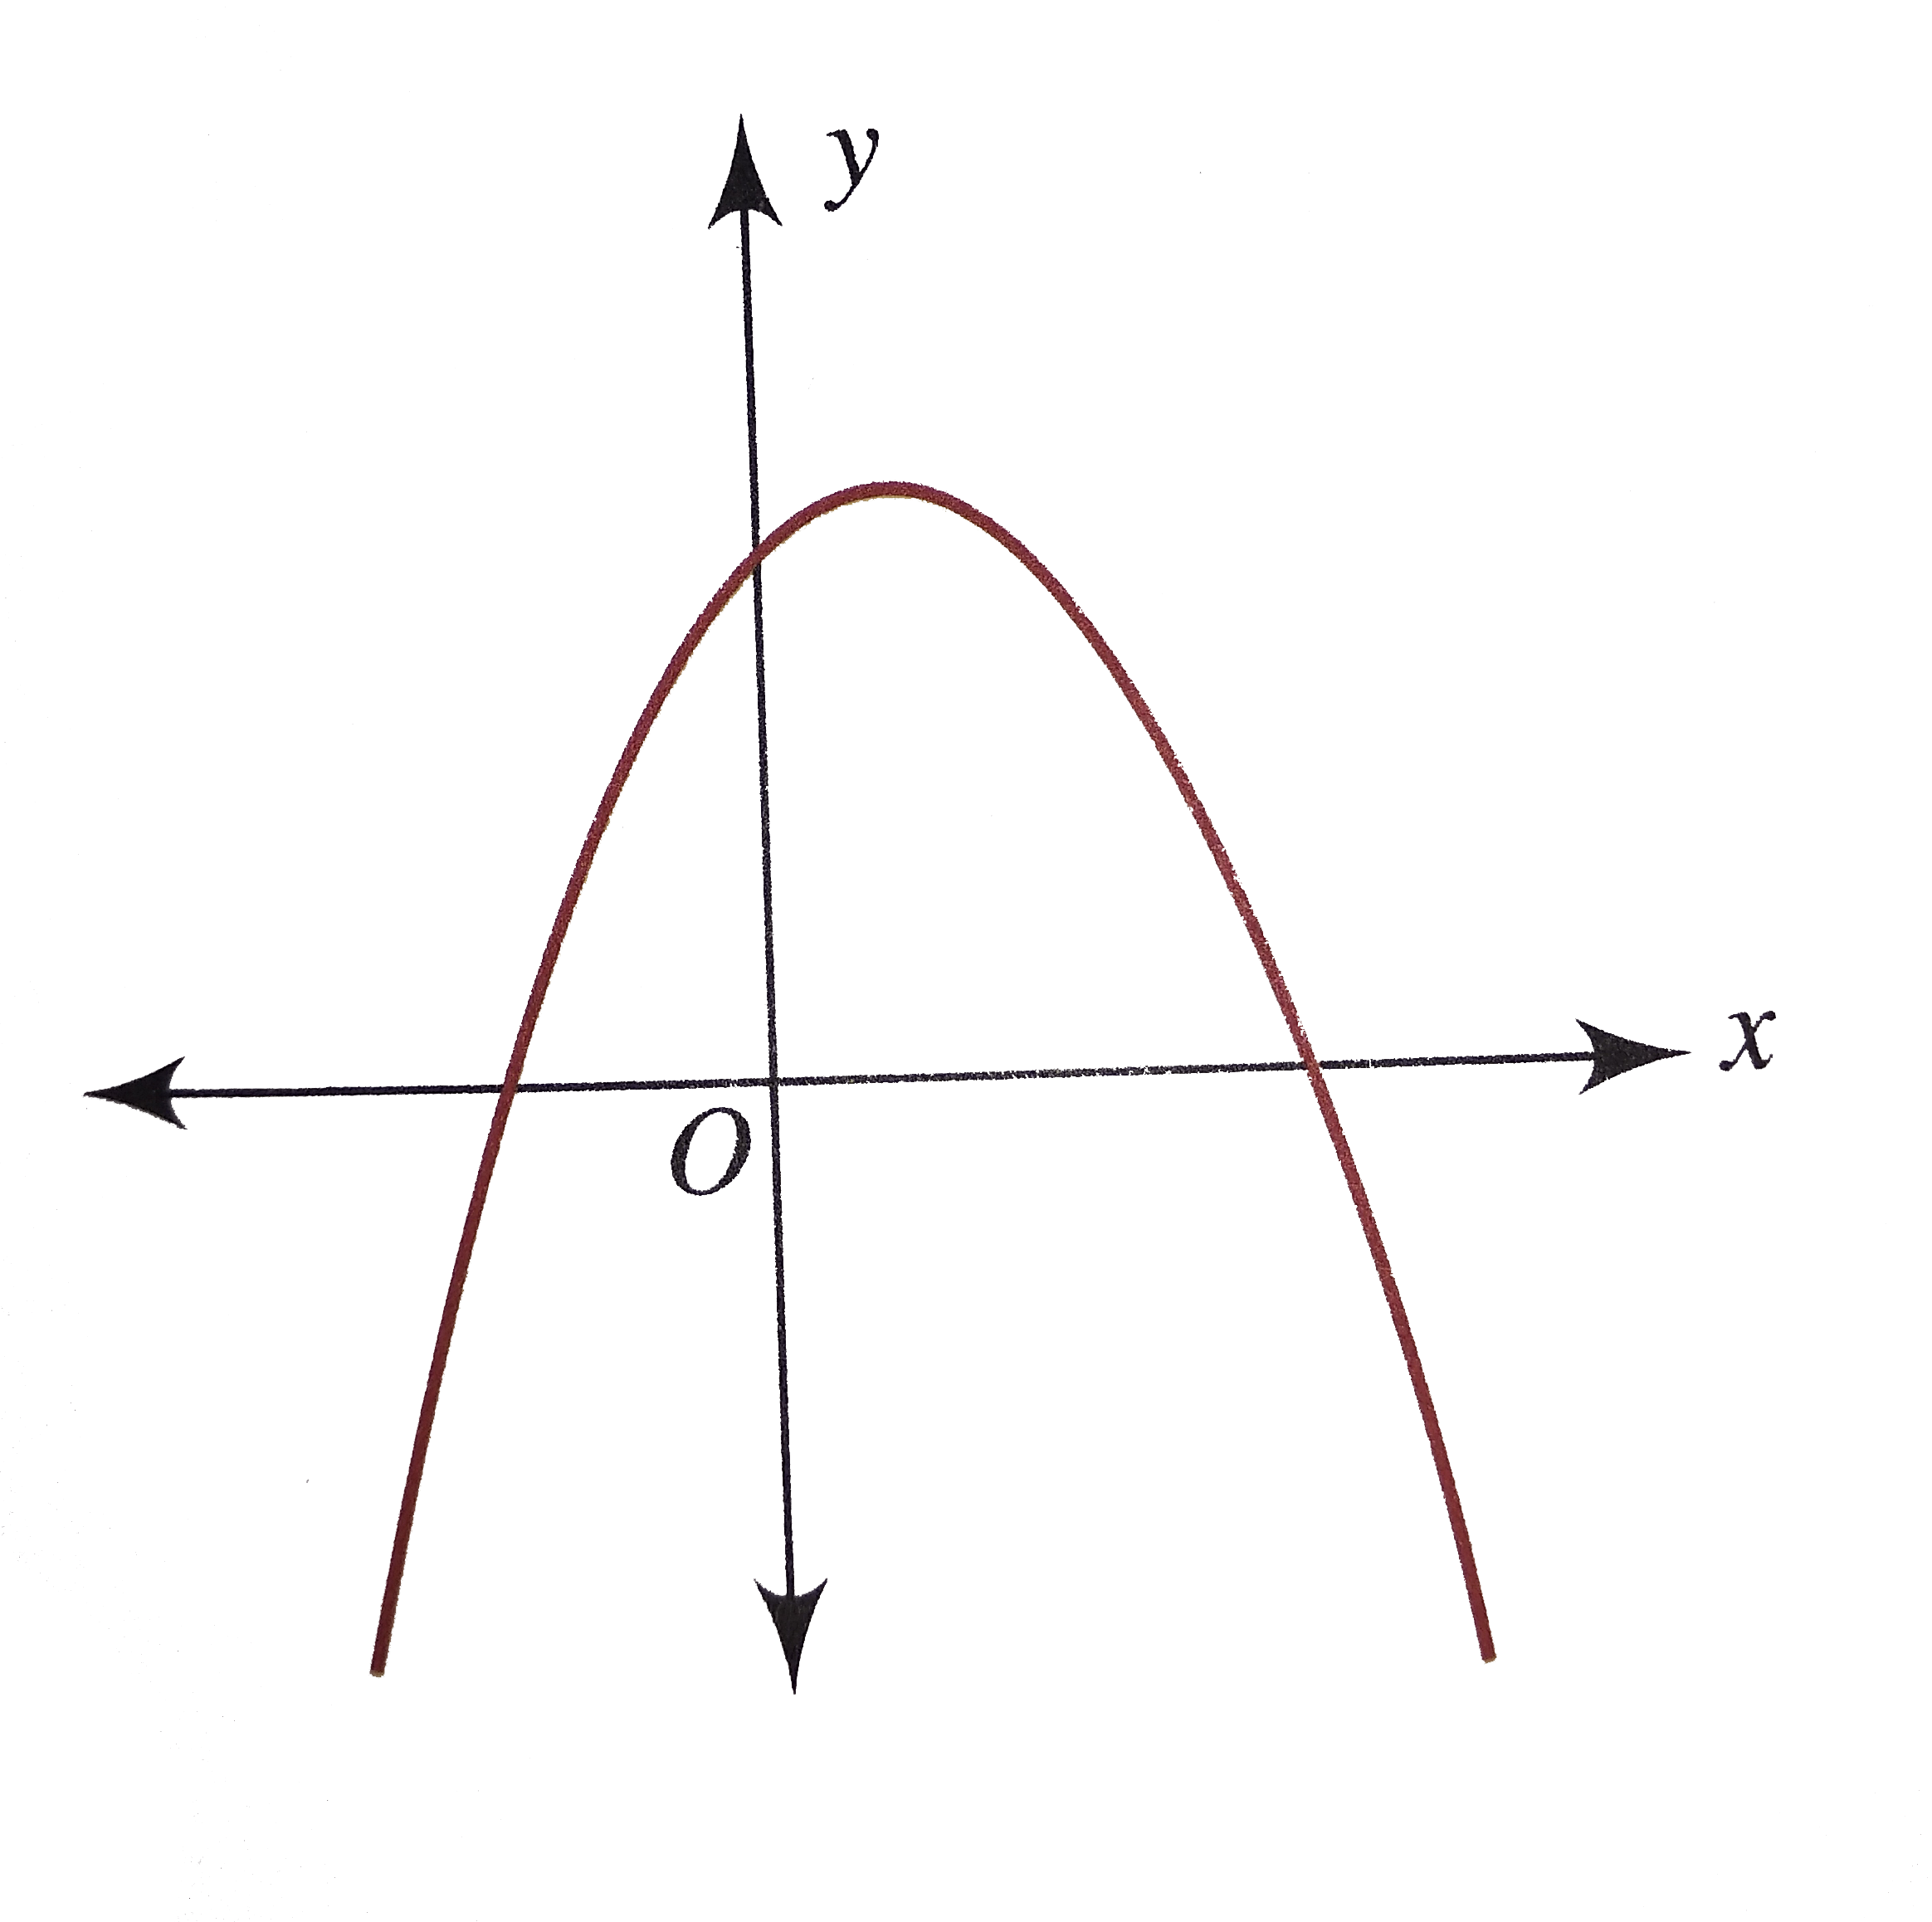 The following figure shows the graph of f(x)= ax^(2)+ bx+c, find the signs of a, b and c.